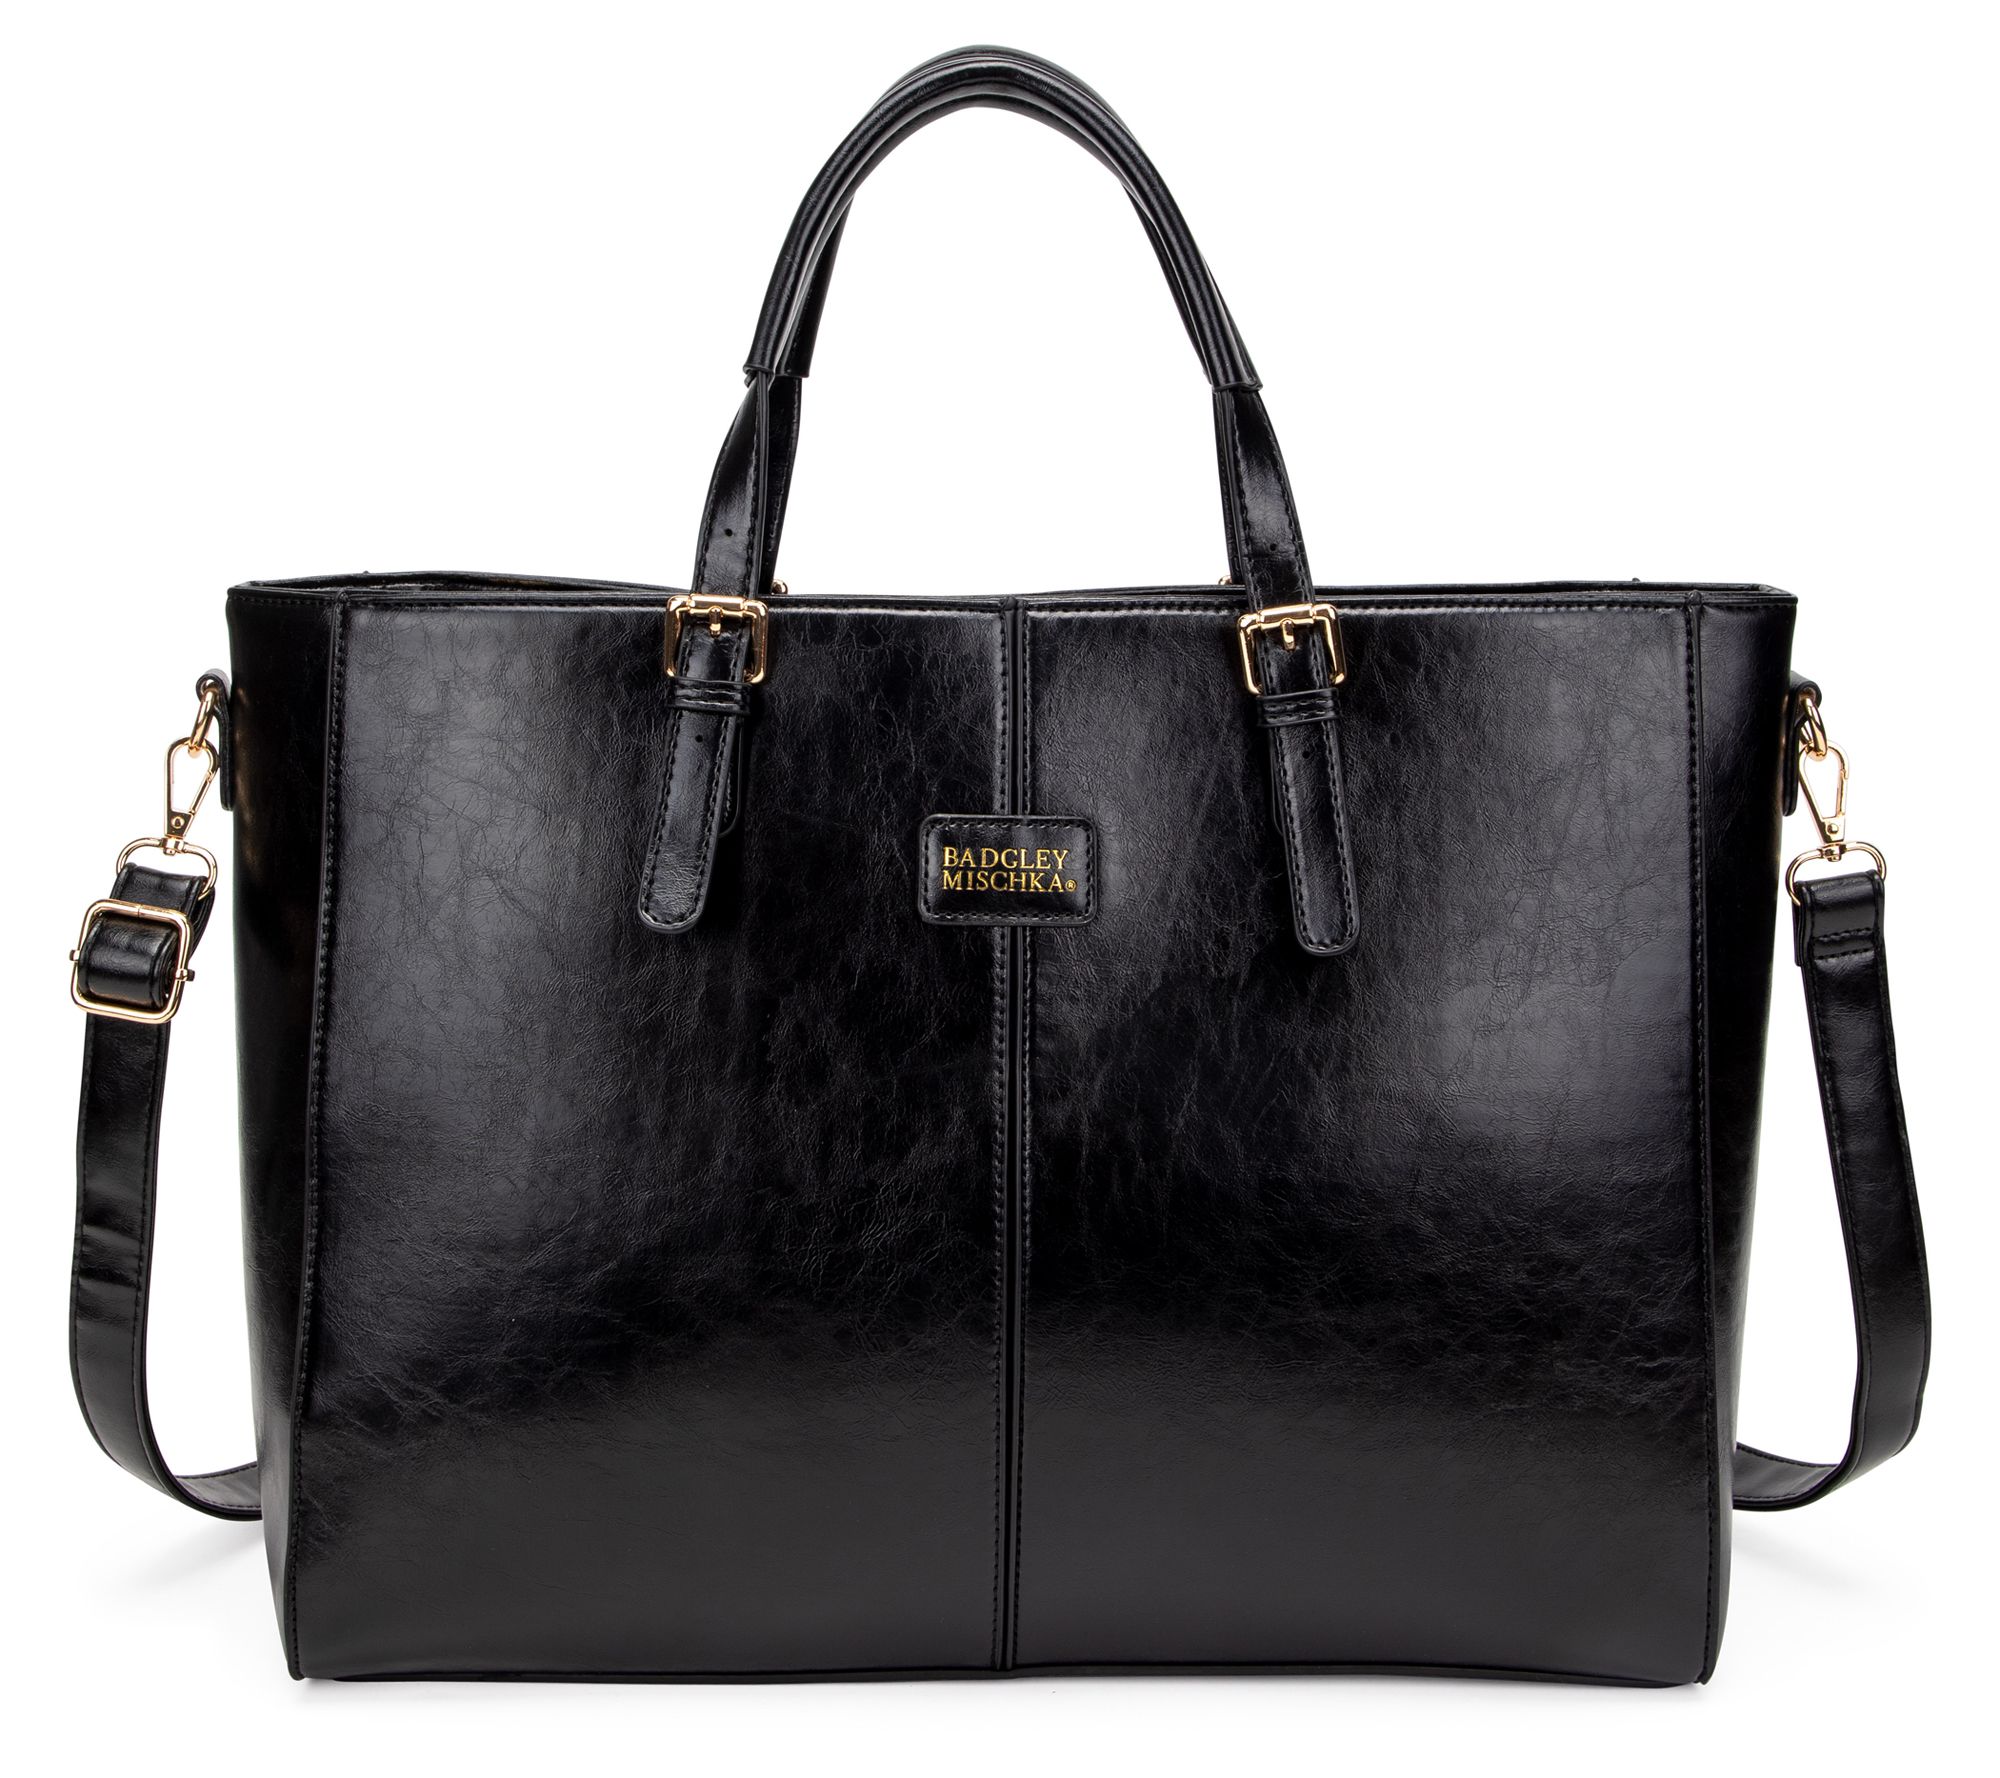 chanel patent leather tote shoulder